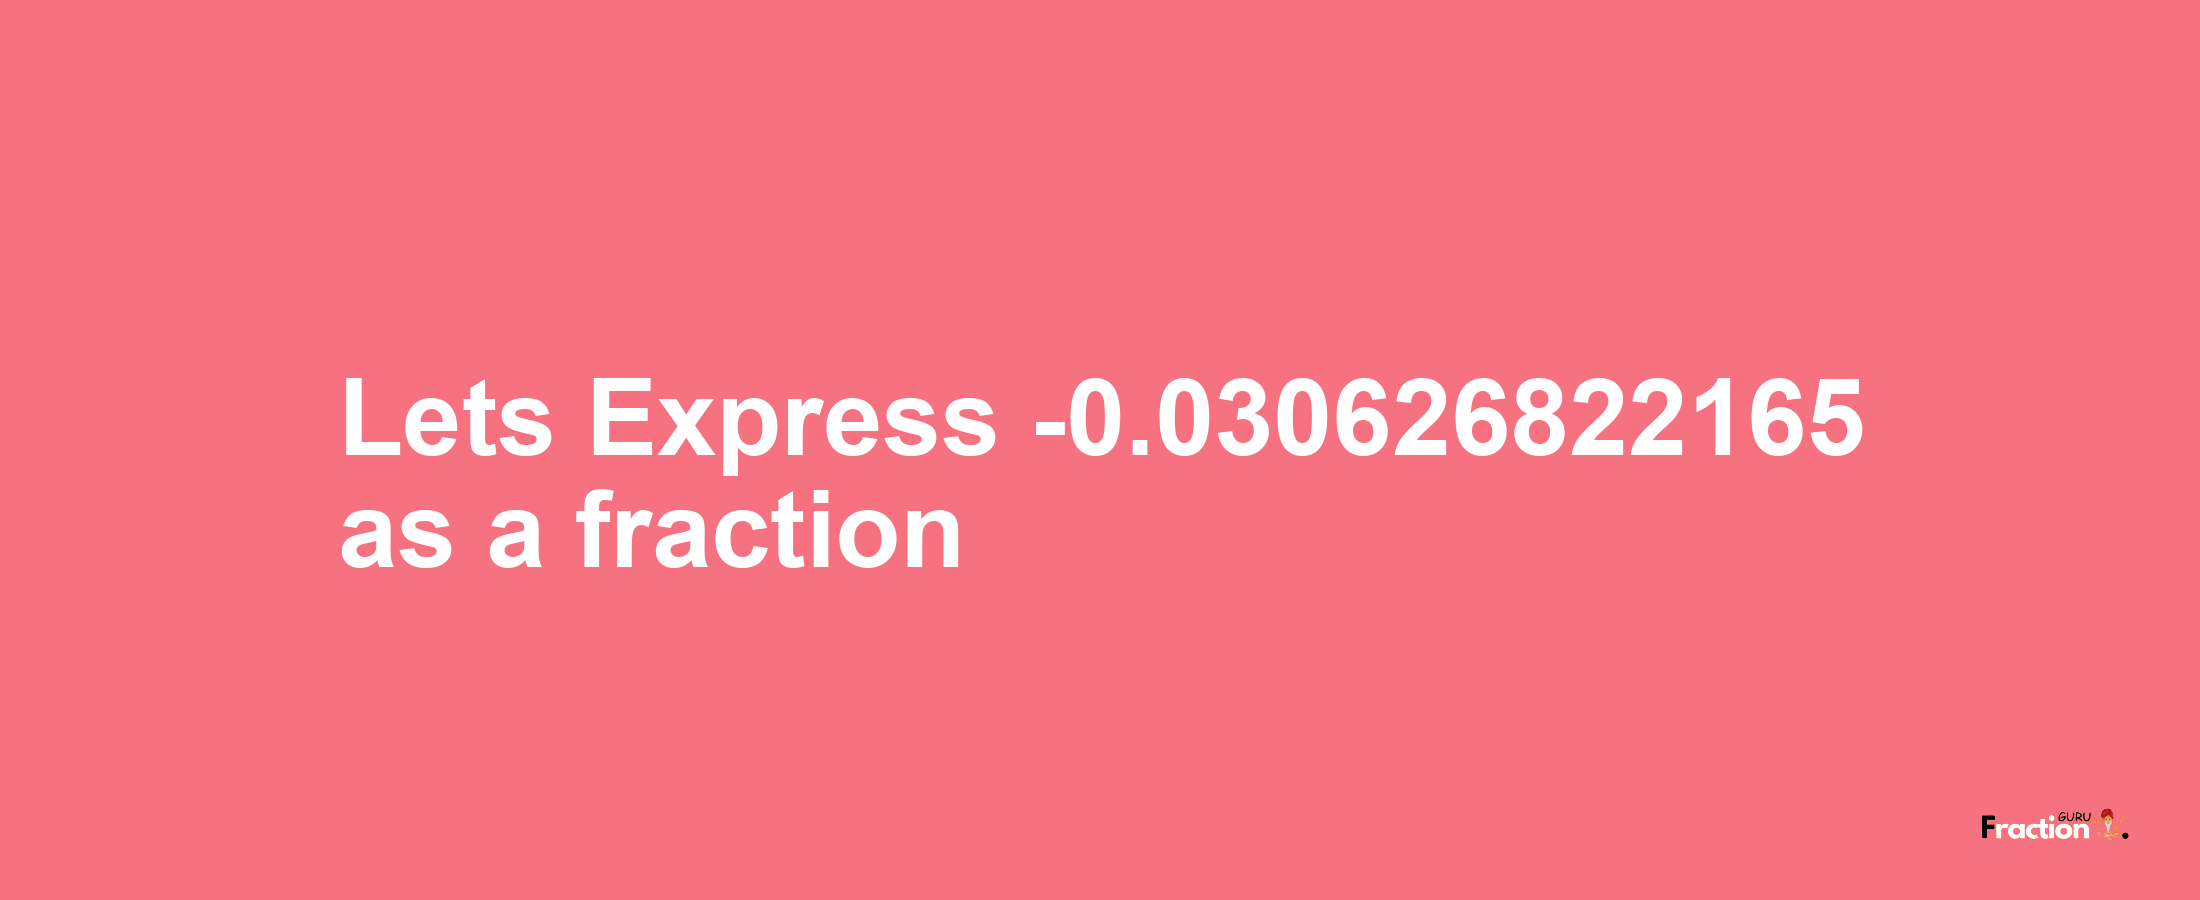 Lets Express -0.030626822165 as afraction